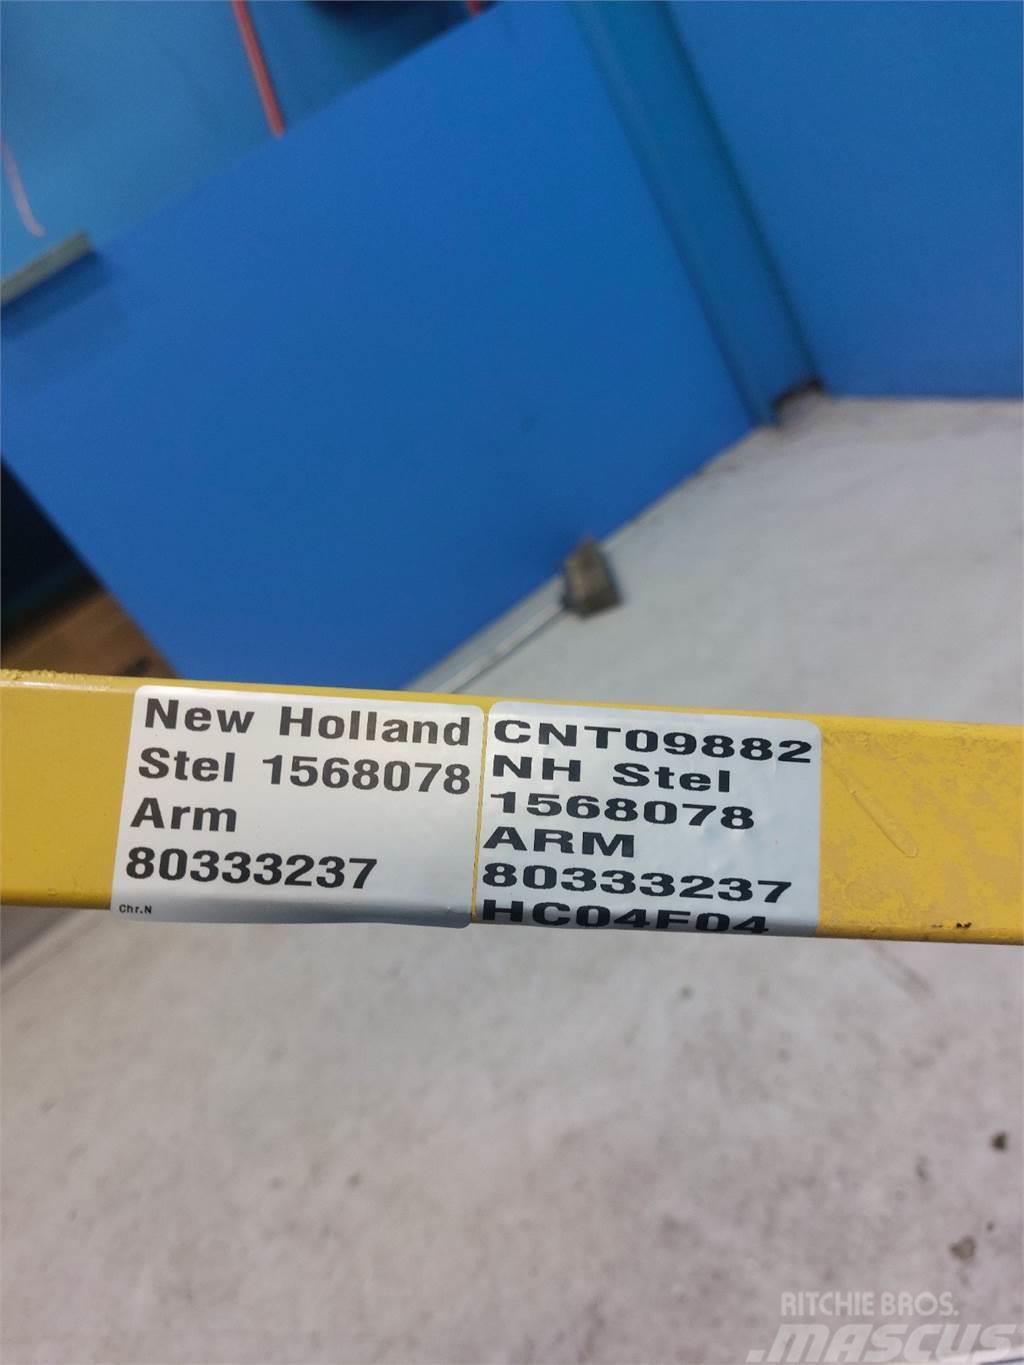 New Holland 8070 Combine harvester accessories